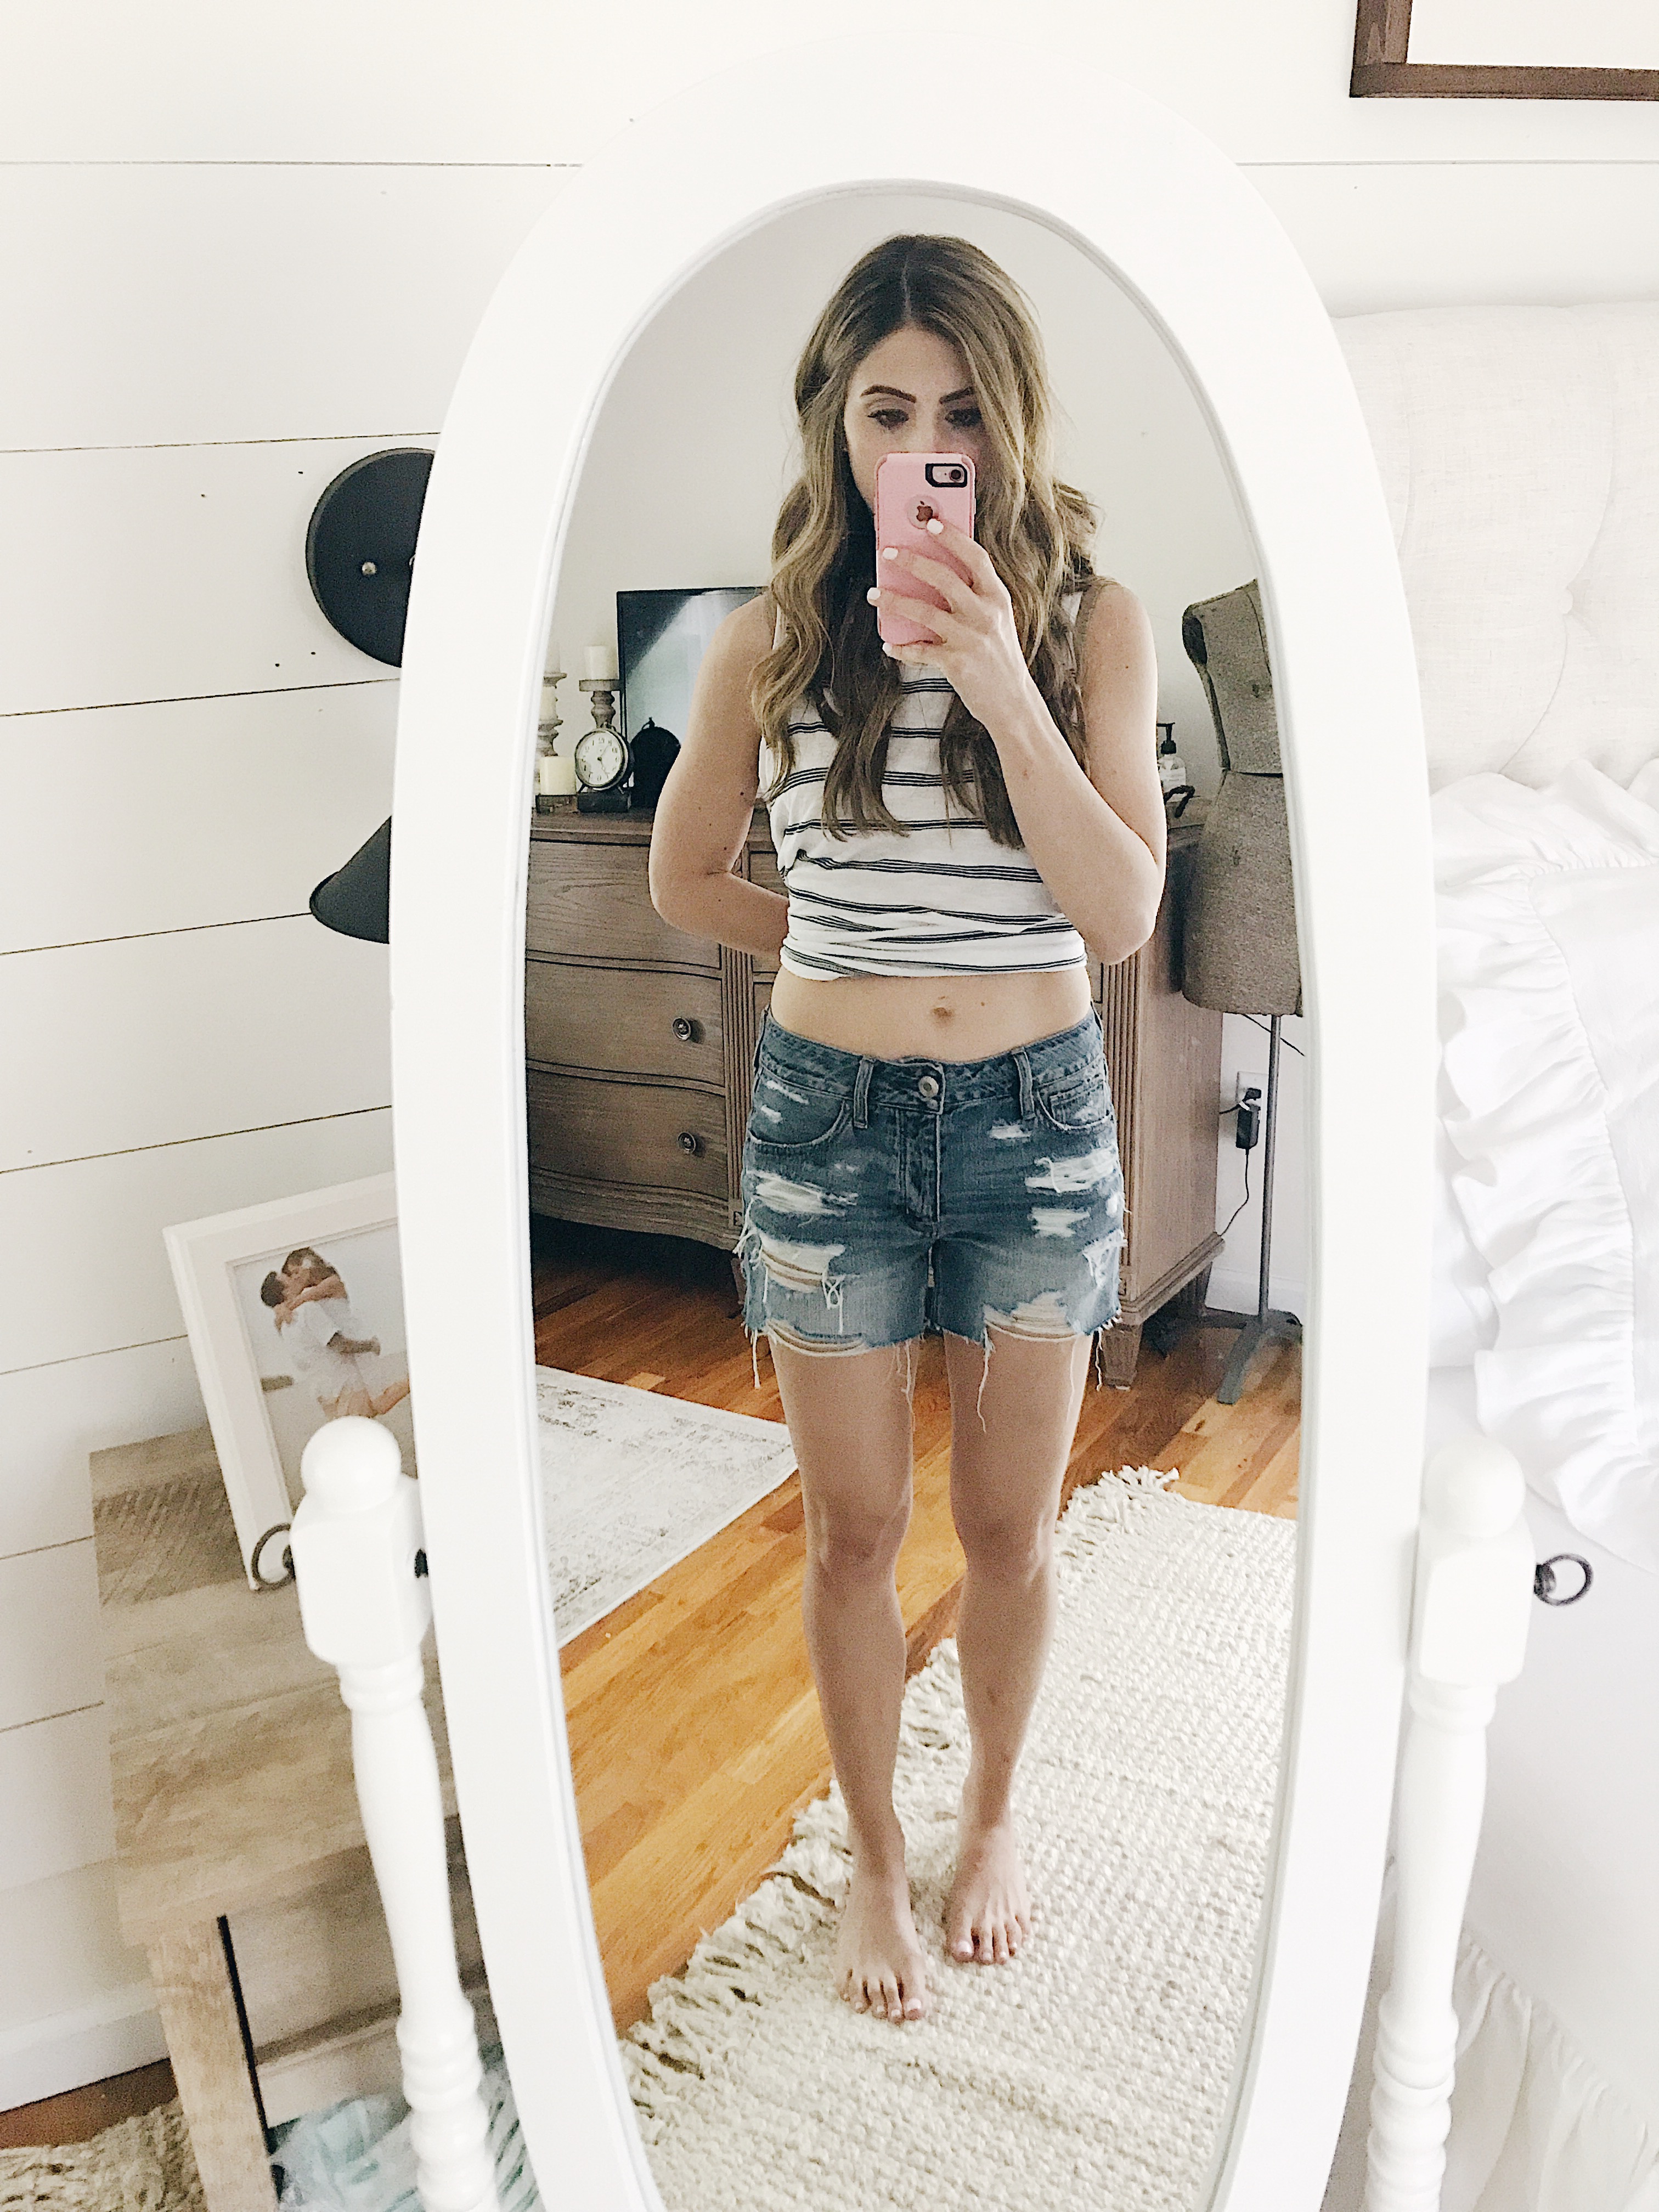 A full review of the Best Mom Shorts, including information on rise, inseam, and photos to show fit! Including a review of American Eagle's Tomgirl shorts. 